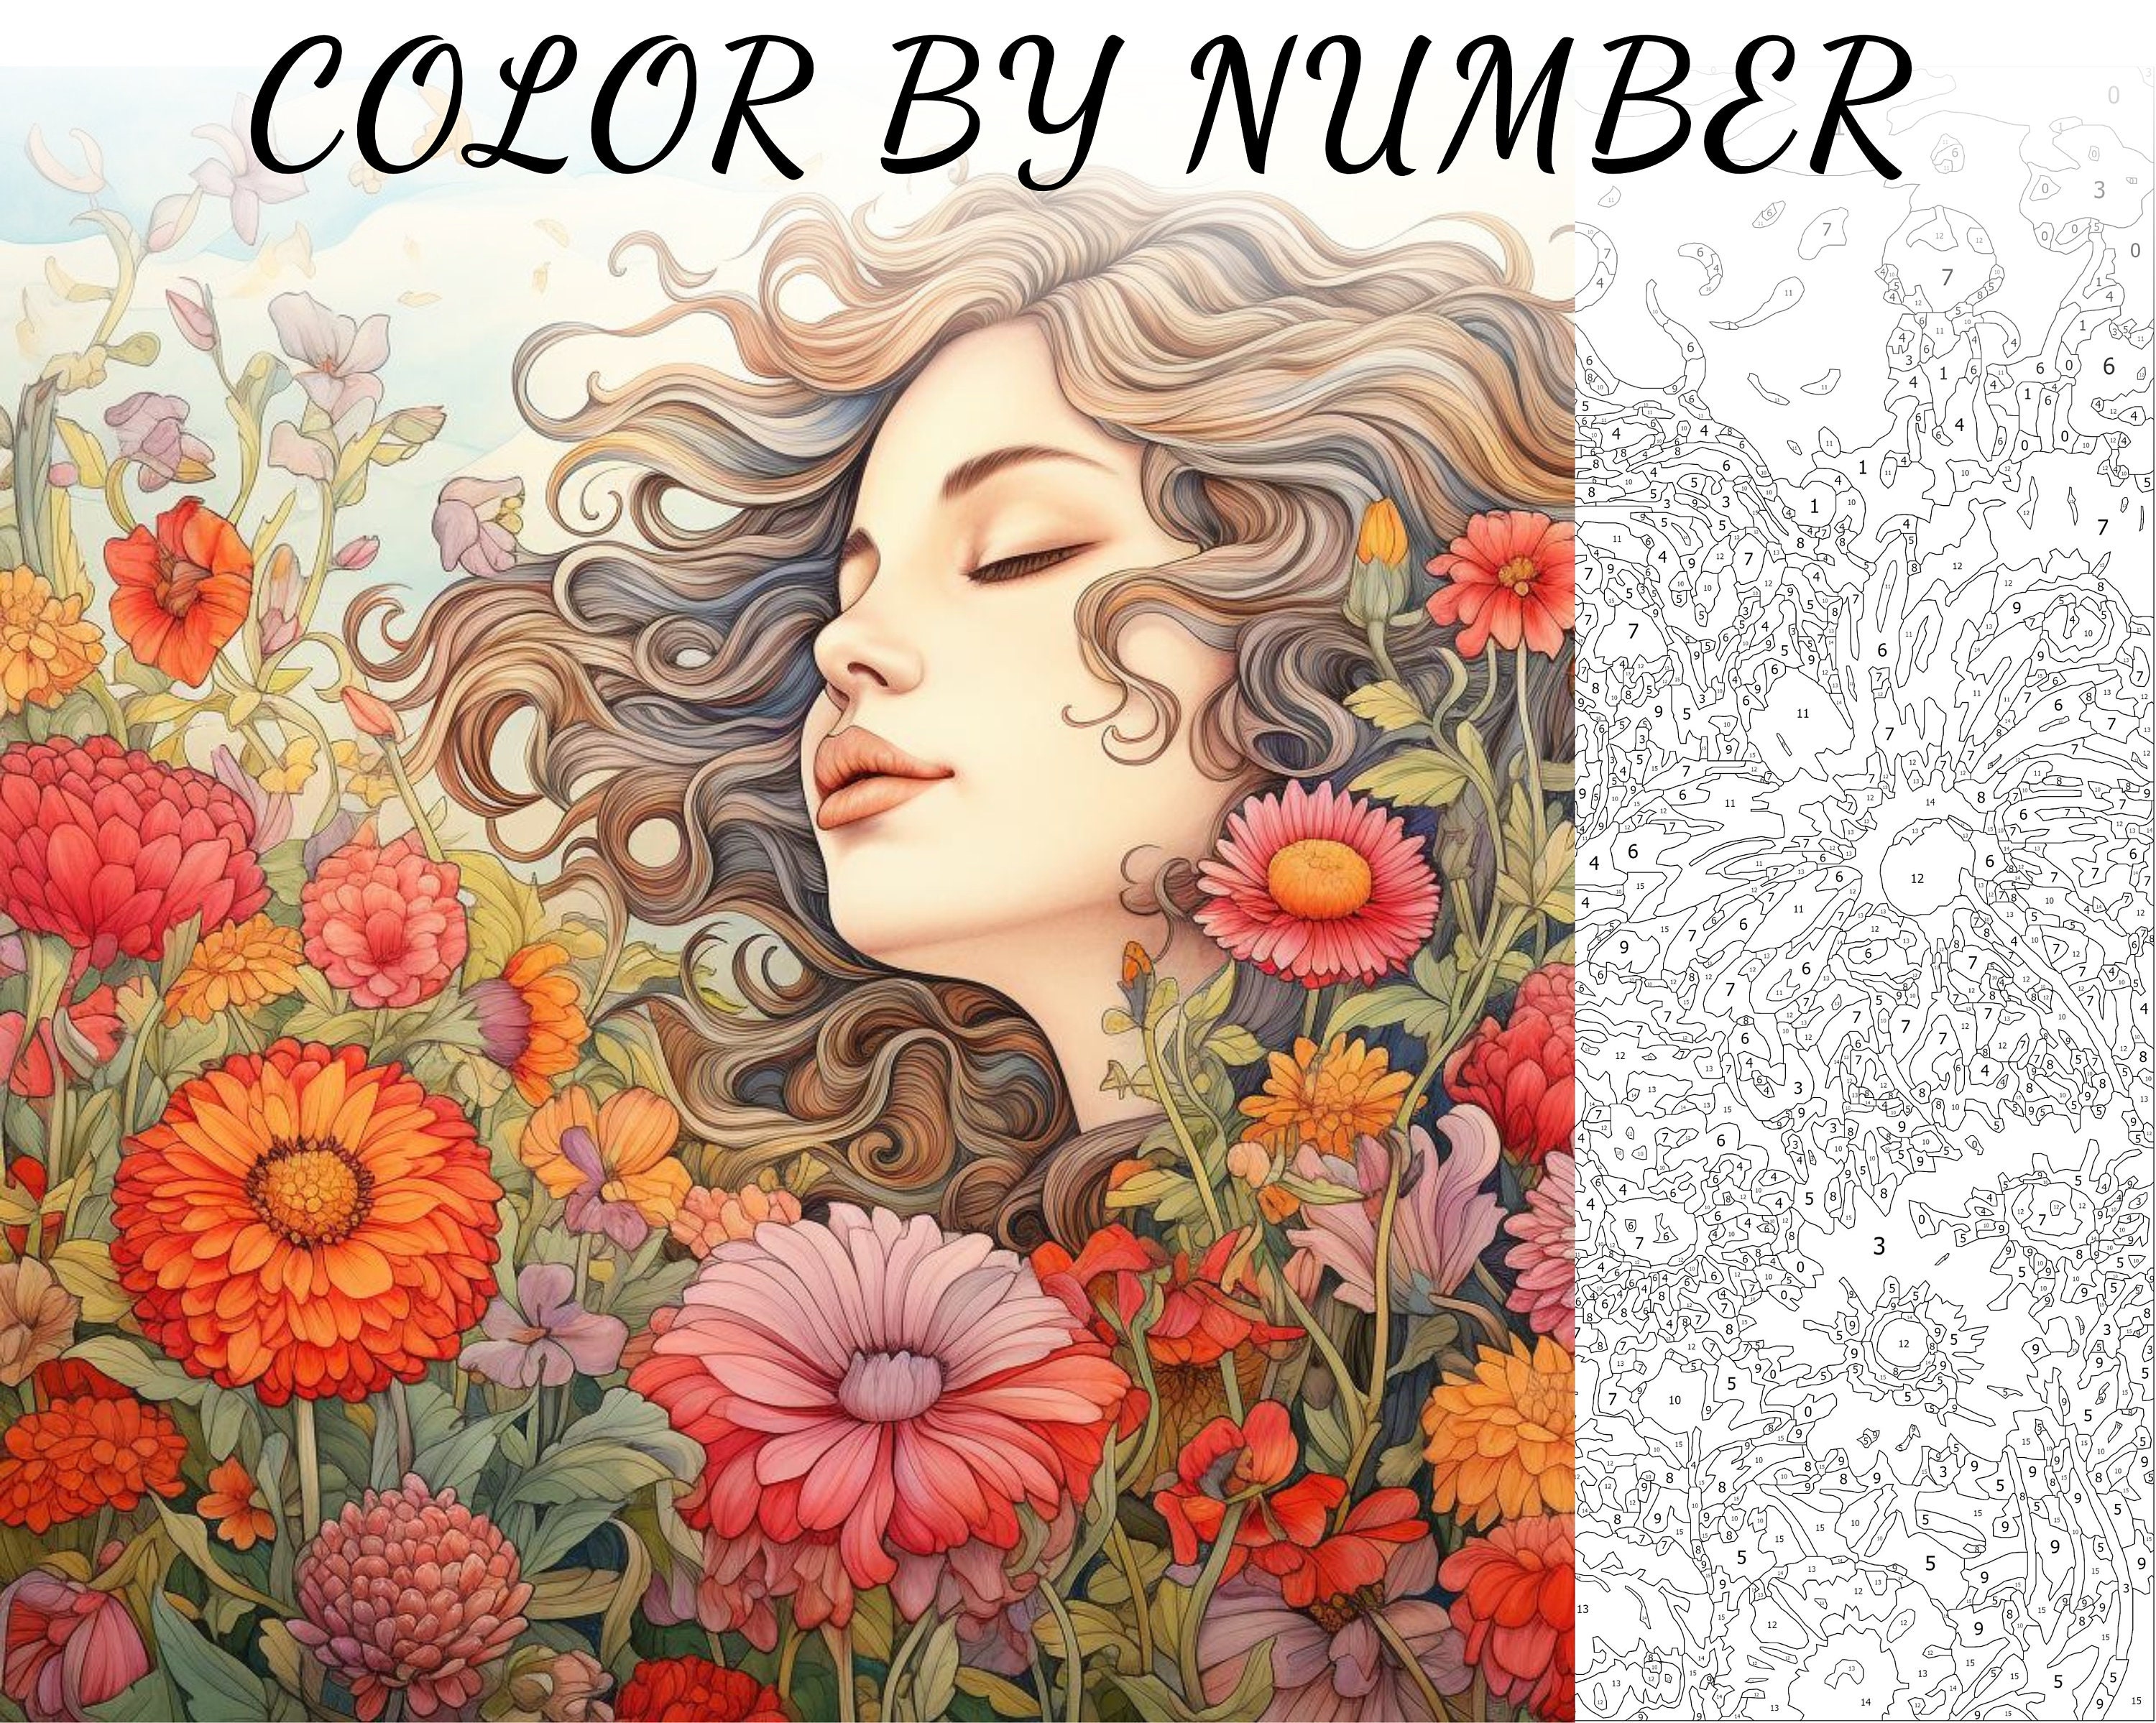 Color by Number Mandala Coloring Pages, Floral Mandala Coloring Book,  Coloring Activities for Adults or Kids 